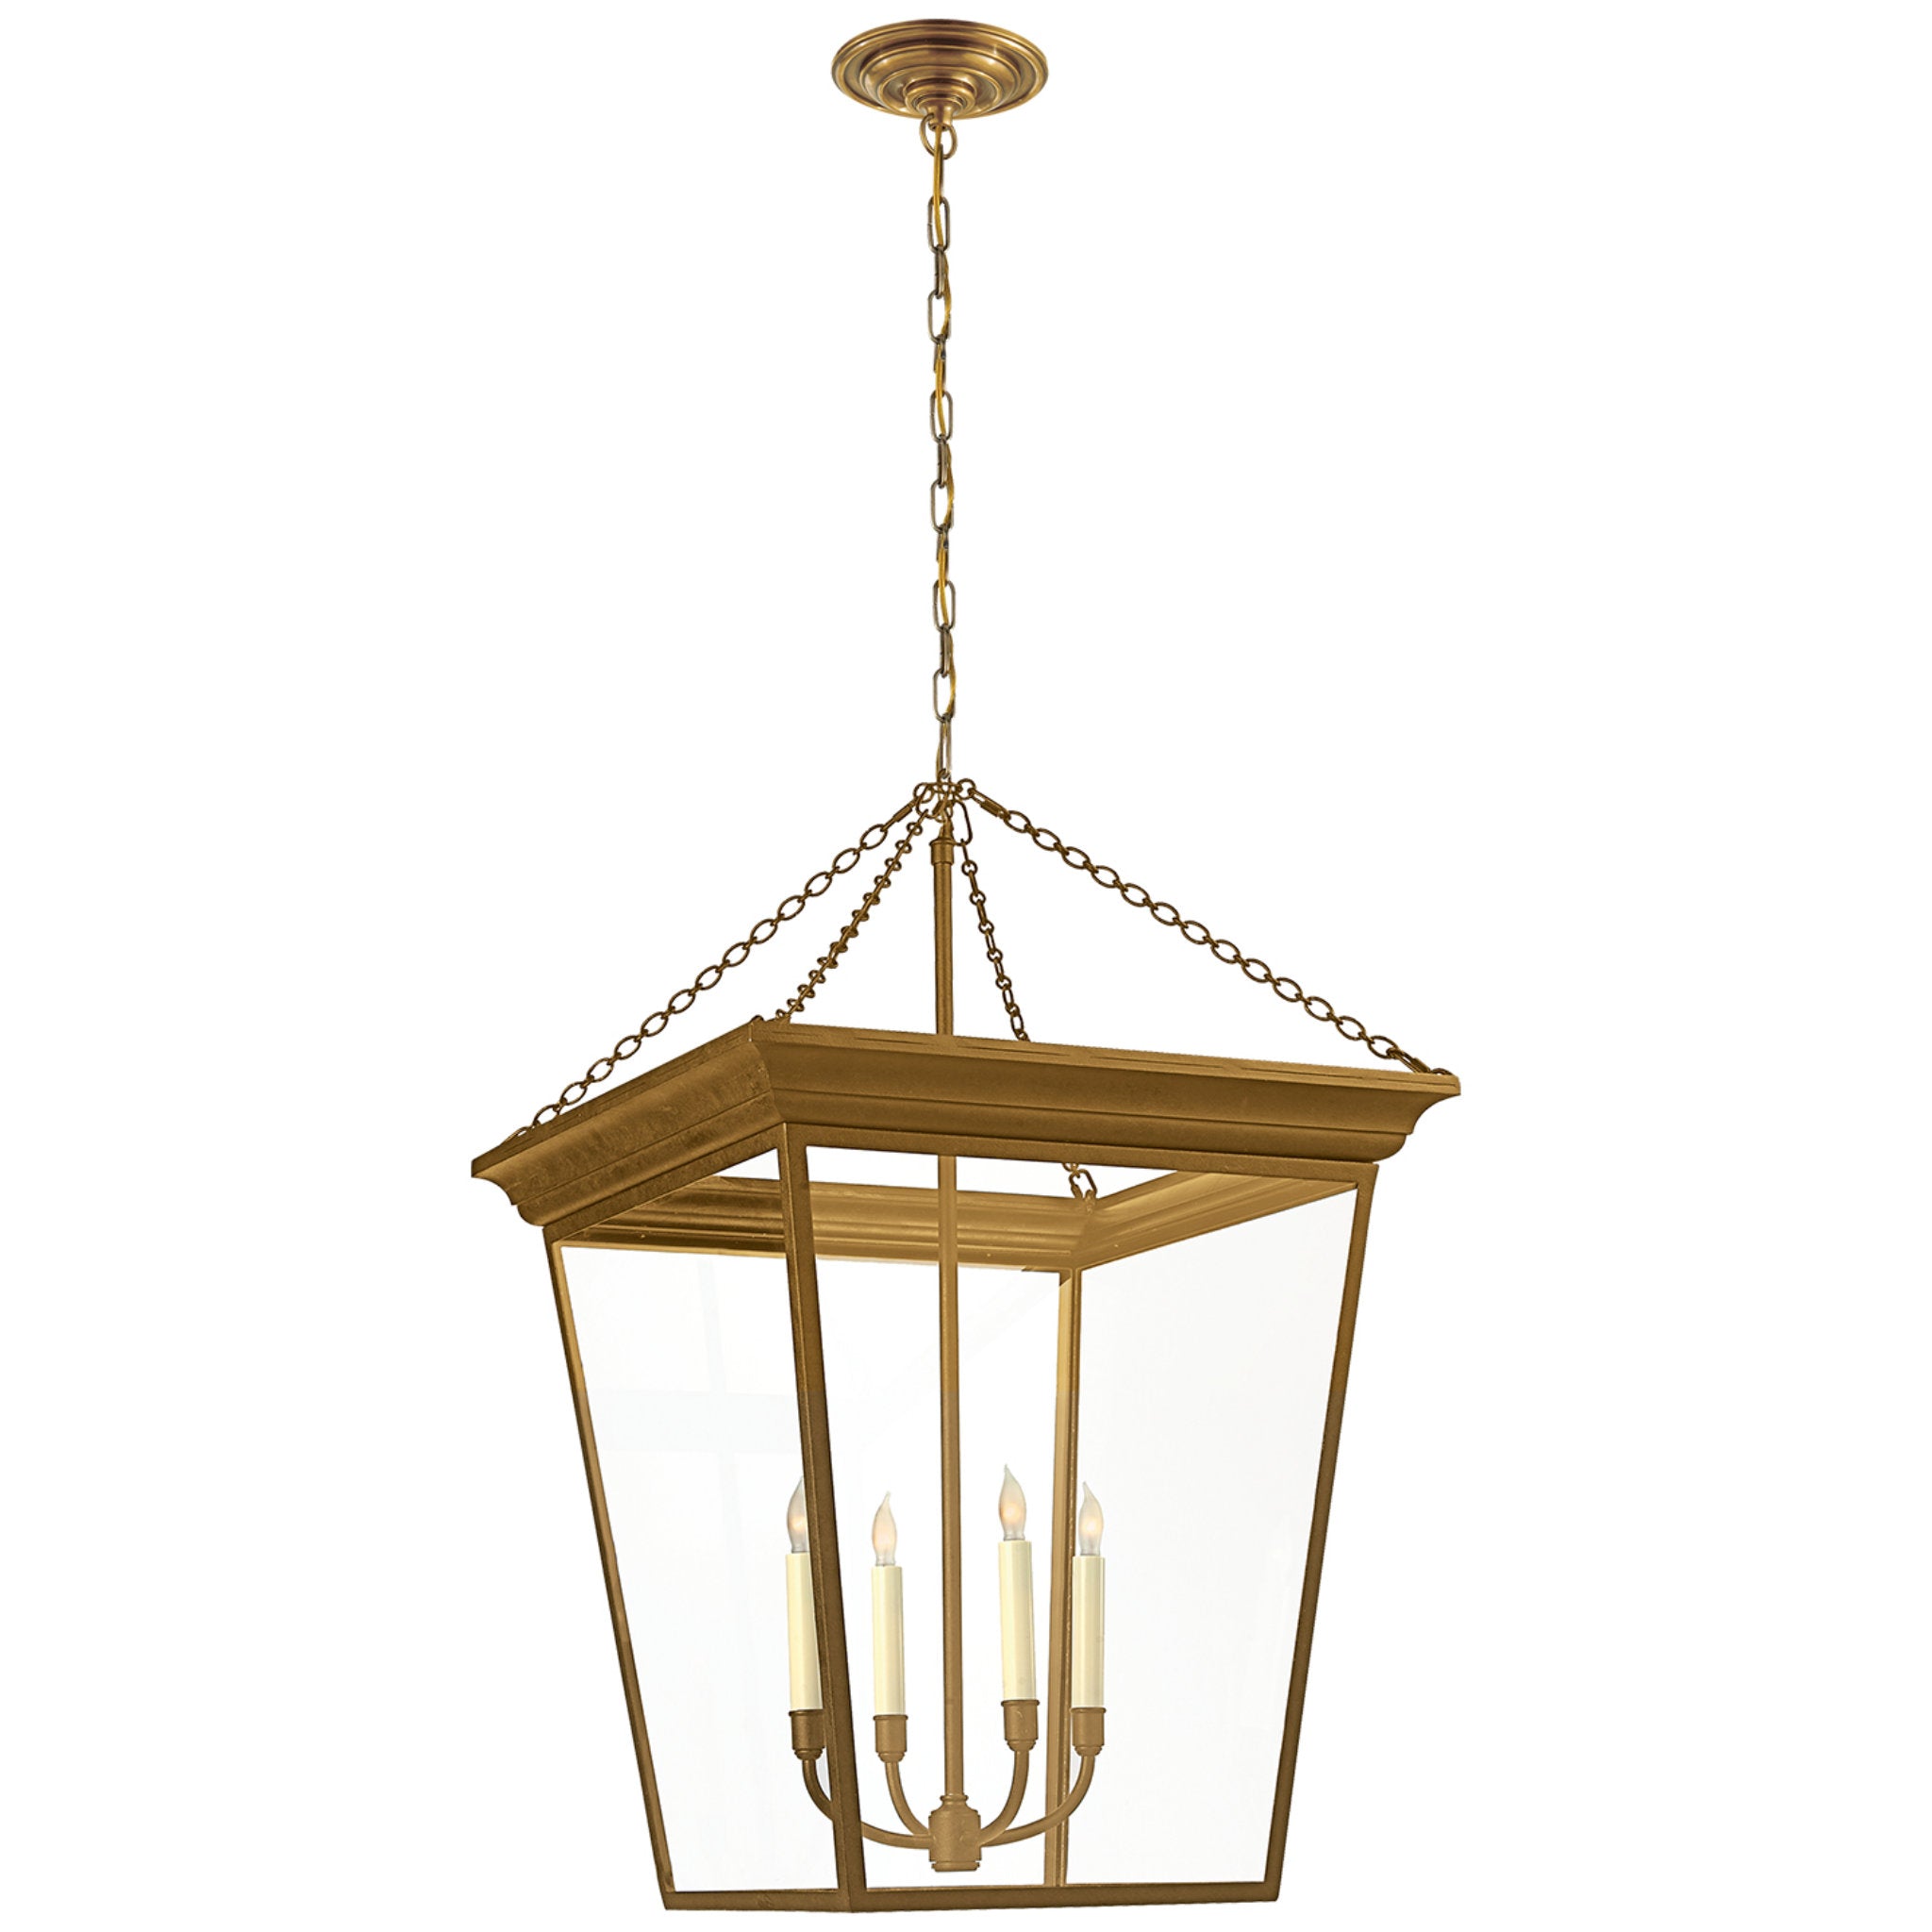 Chapman & Myers Cornice Large Lantern in Hand-Rubbed Antique Brass